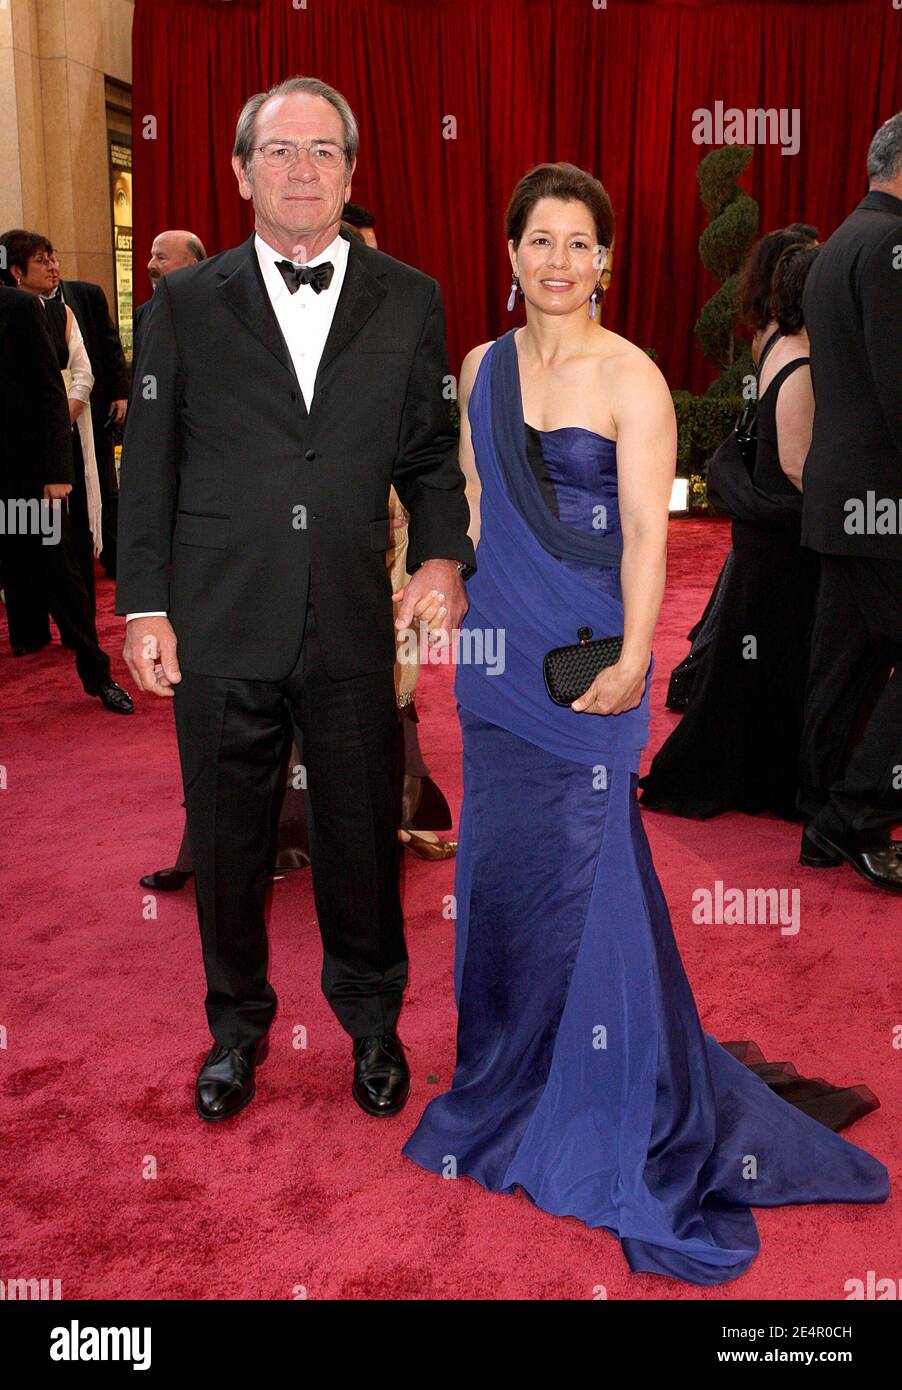 Tommy Lee Jones and wife Dawn arrive at the 80th Academy Awards, held at the Kodak Theater on Hollywood Boulevard in Los Angeles, CA, USA on February 24, 2008. Photo by Ian West/PA Photos/ABACAPRESS.COM Stock Photo